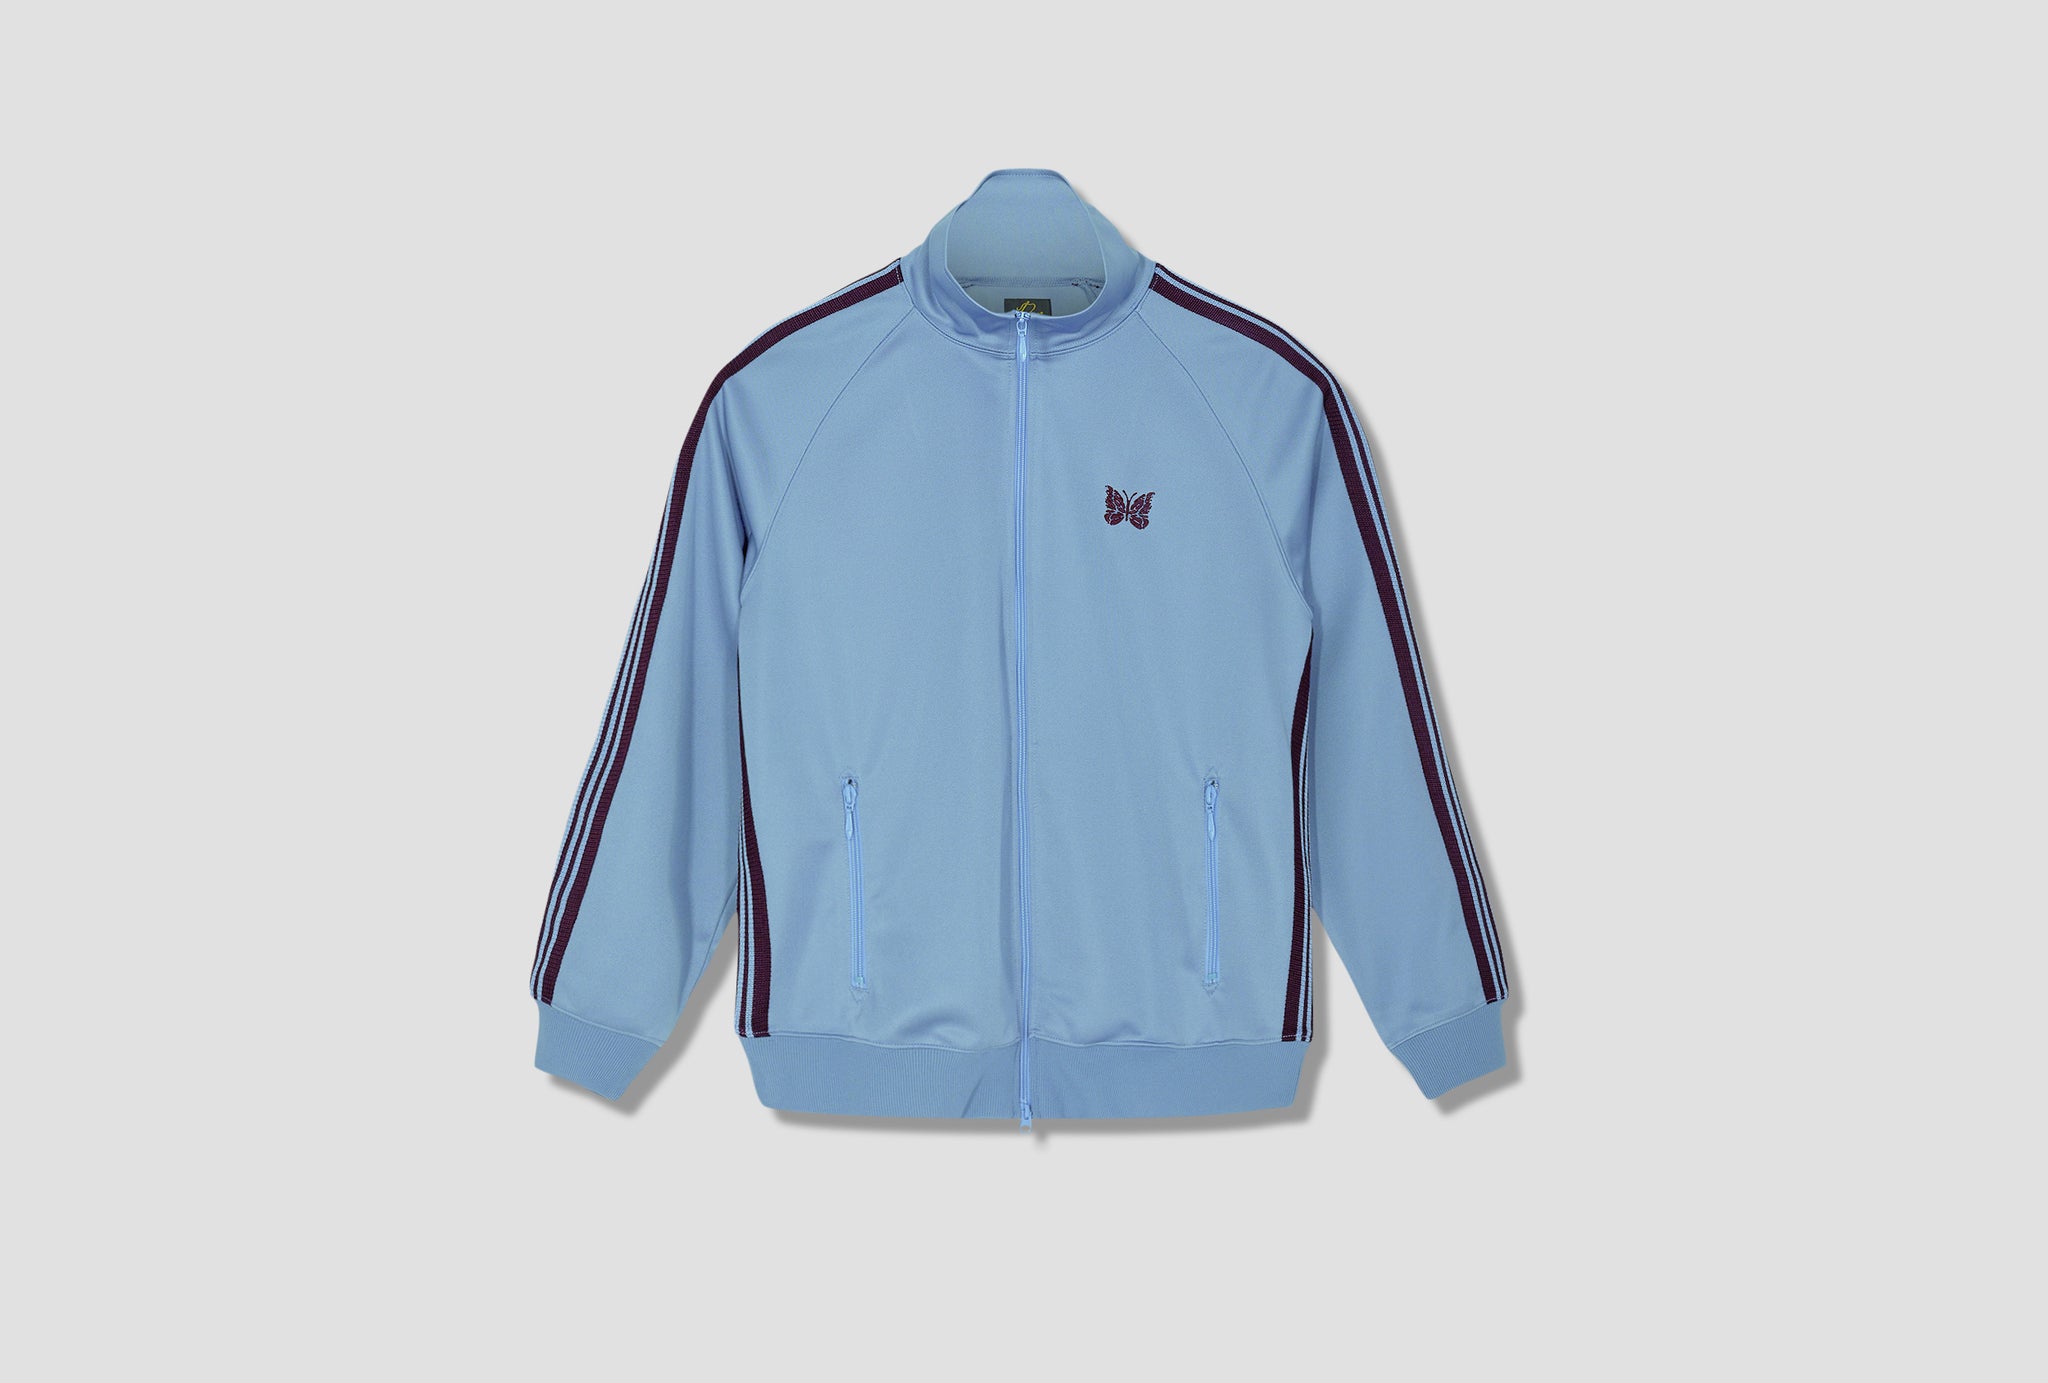 TRACK JACKET - POLY SMOOTH KP218 Light blue